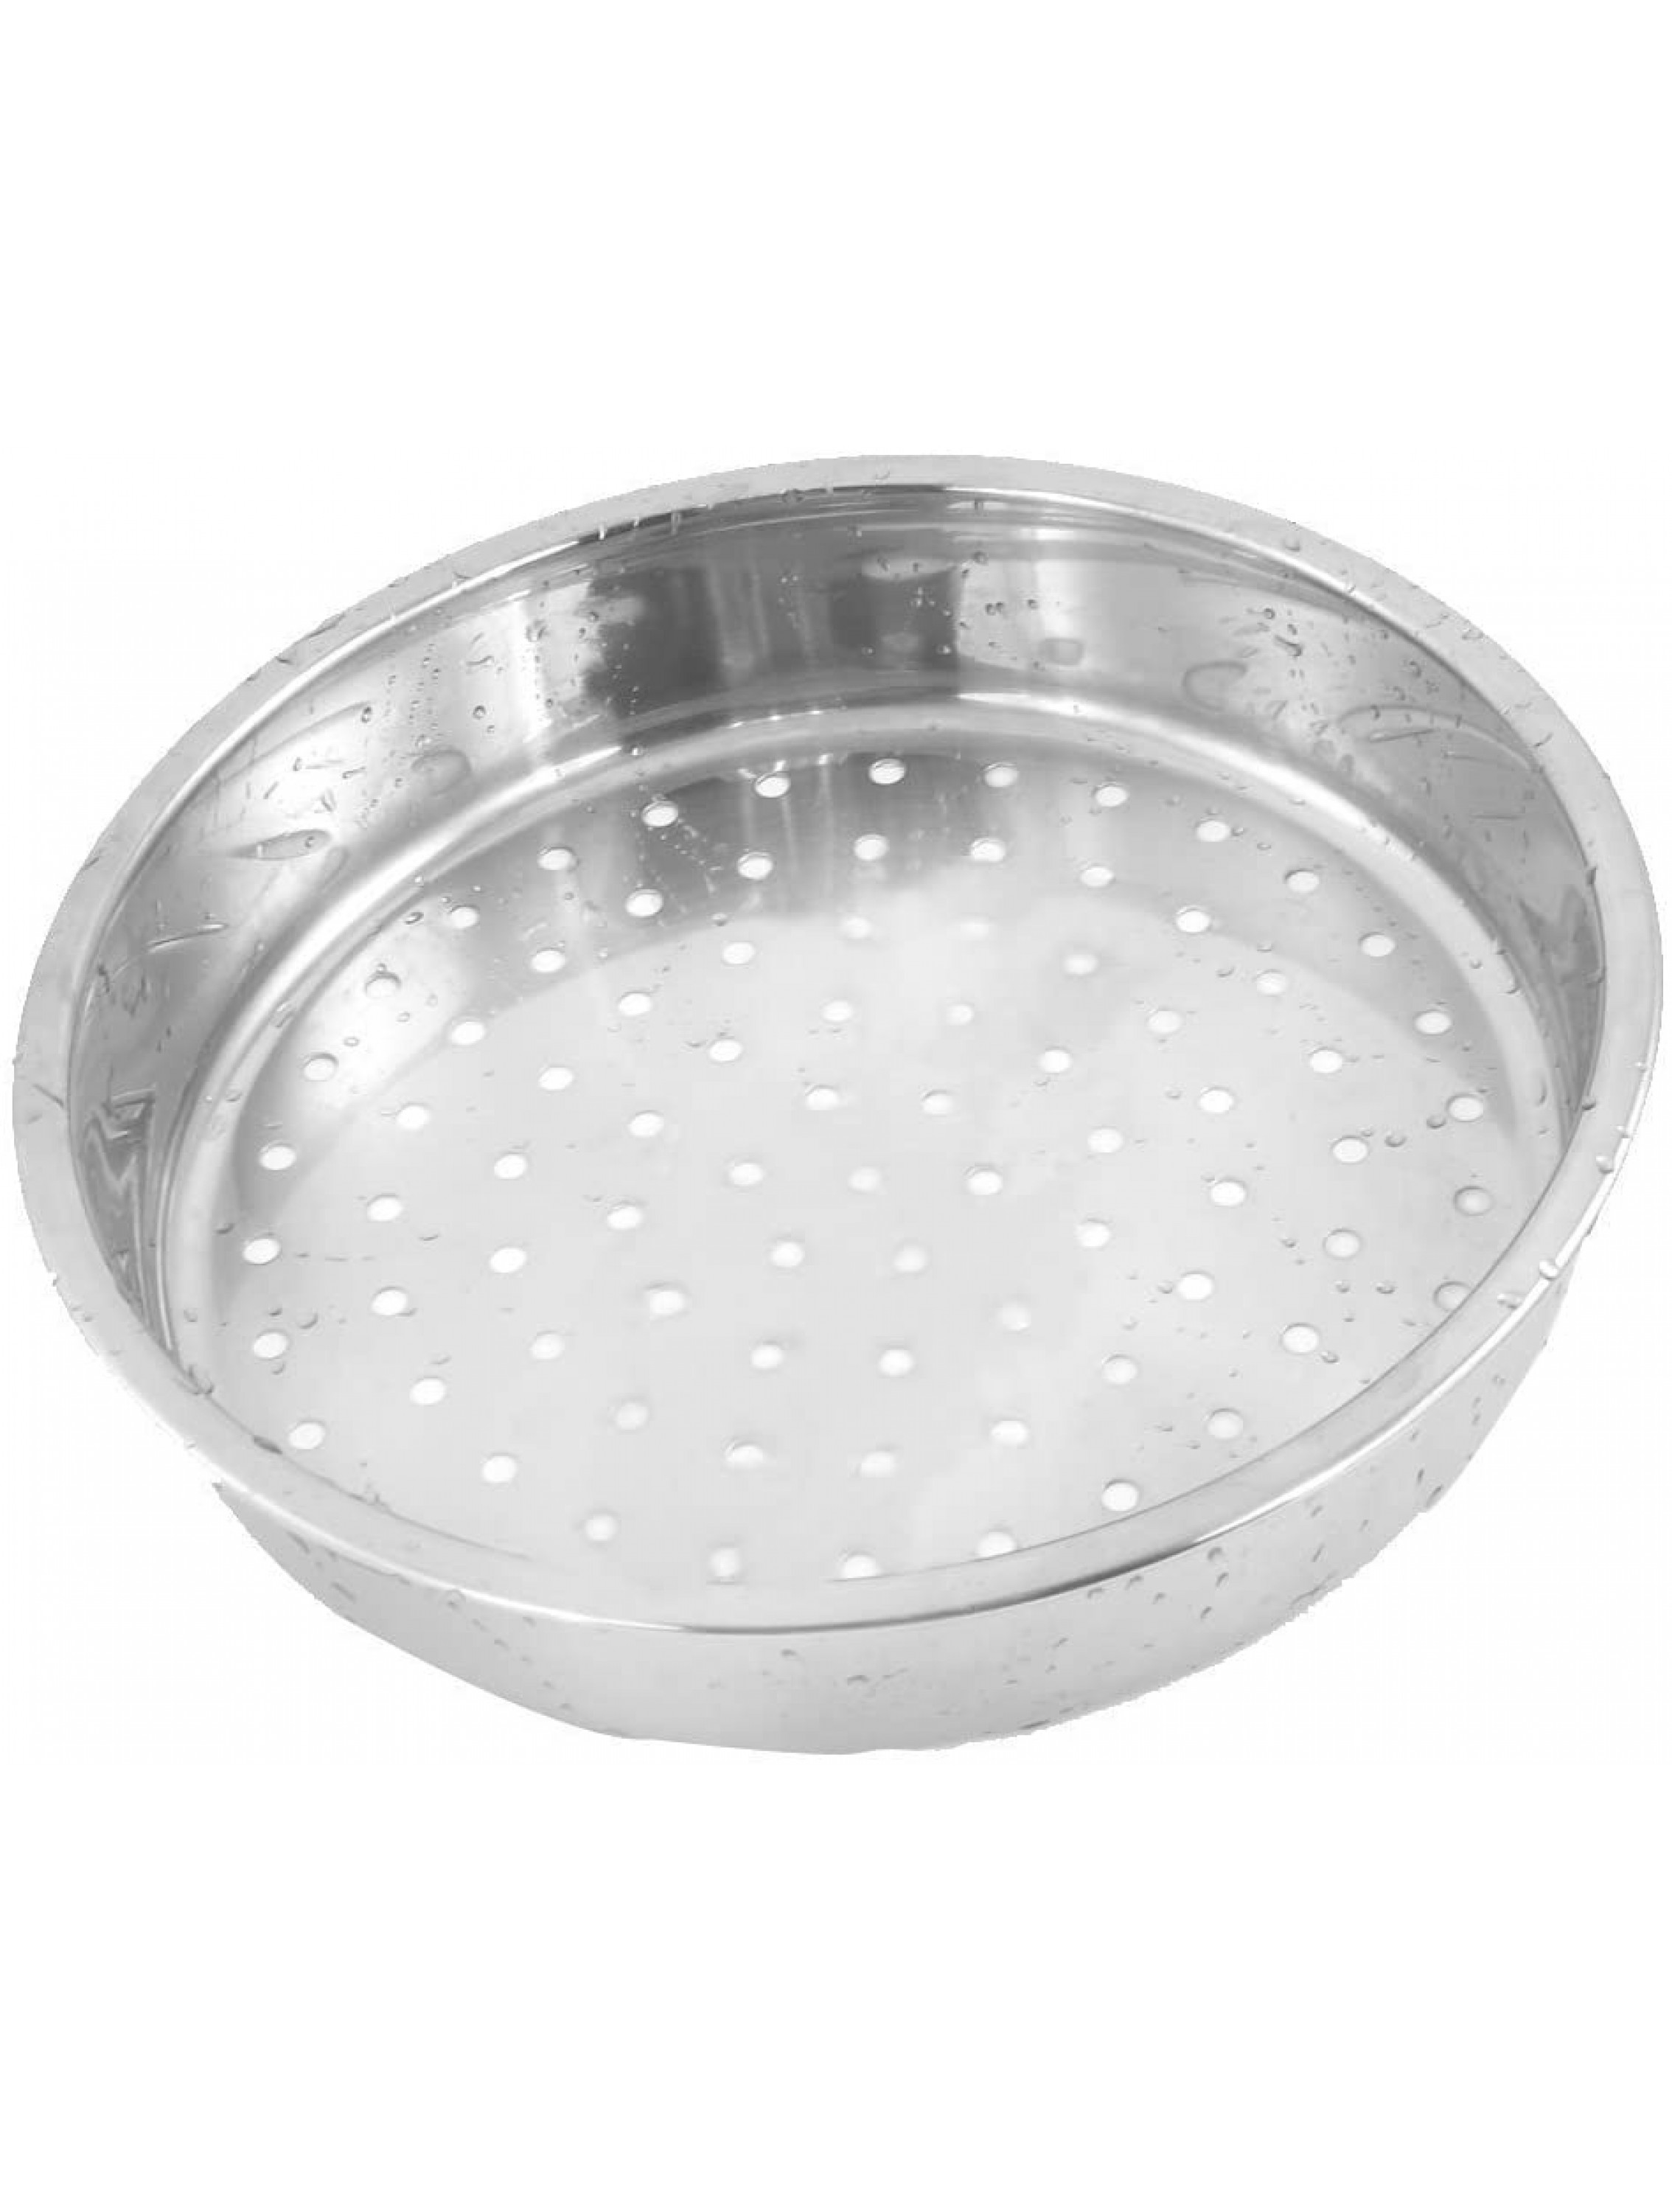 Round Stainless Steel Food Cooking Steamer Rack Cookware 8.3 Inch Dia - BRIGN6M9O